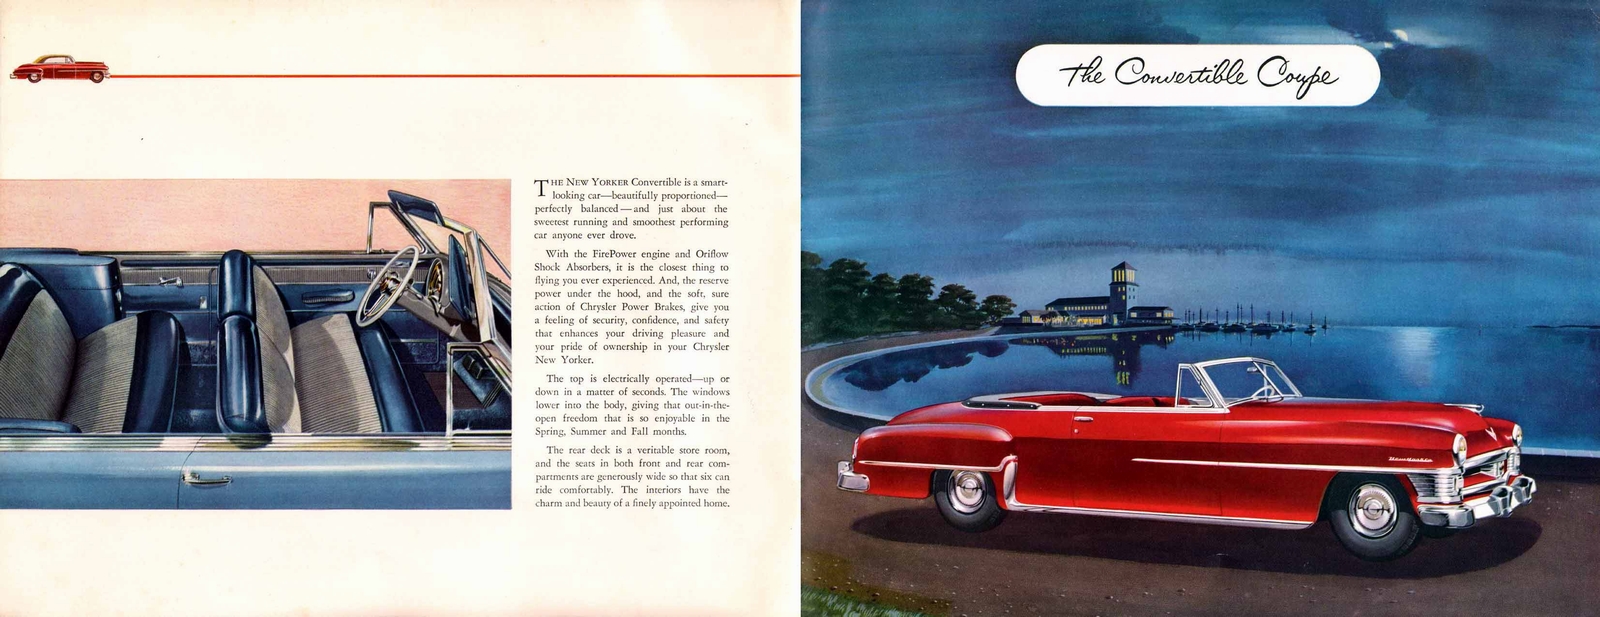 1952 Chrysler New Yorker Brochure Page 3